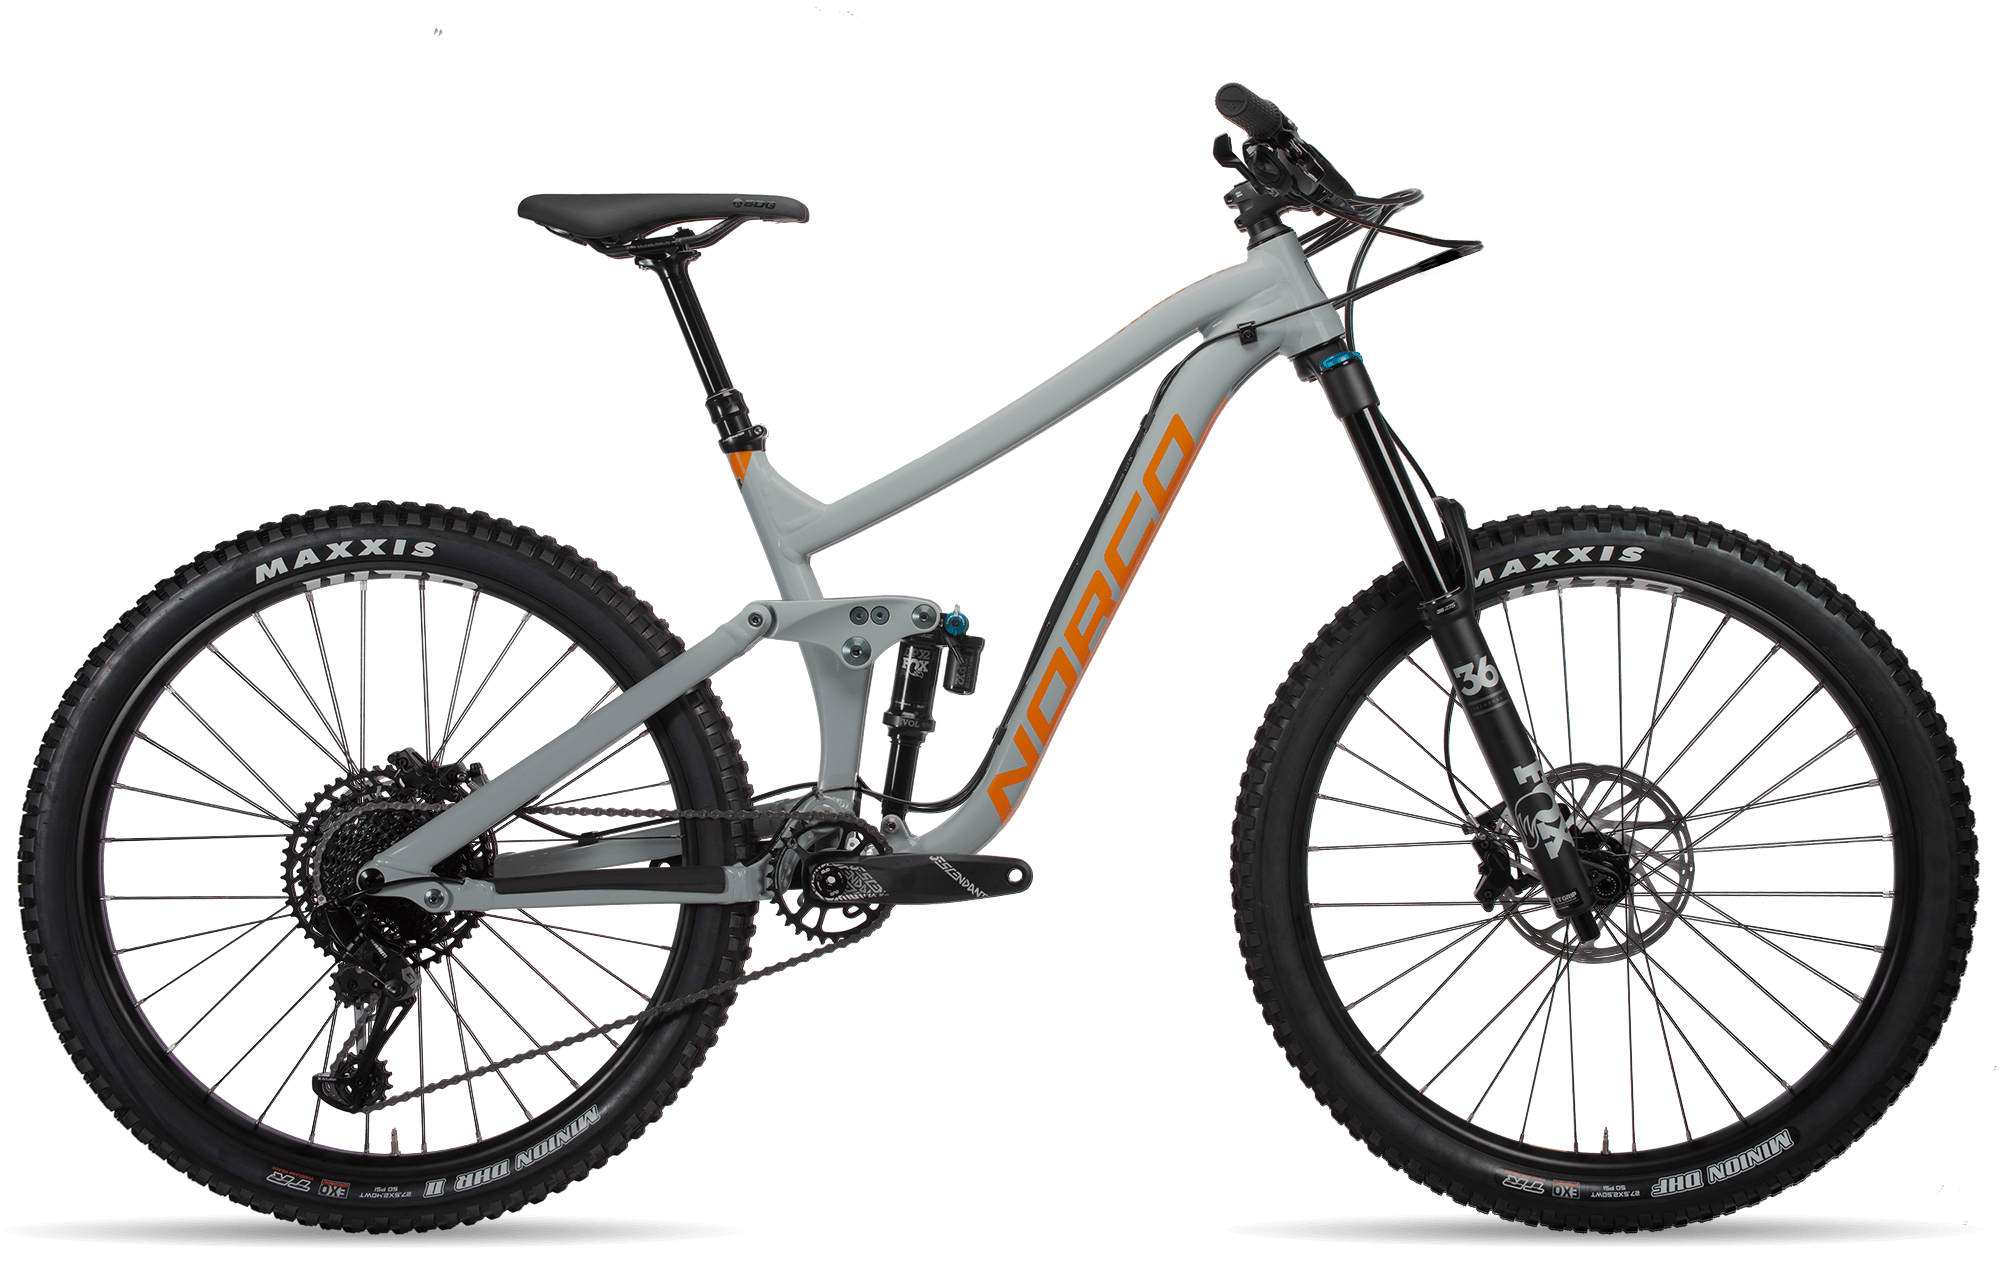 ride1up roadster v2 review